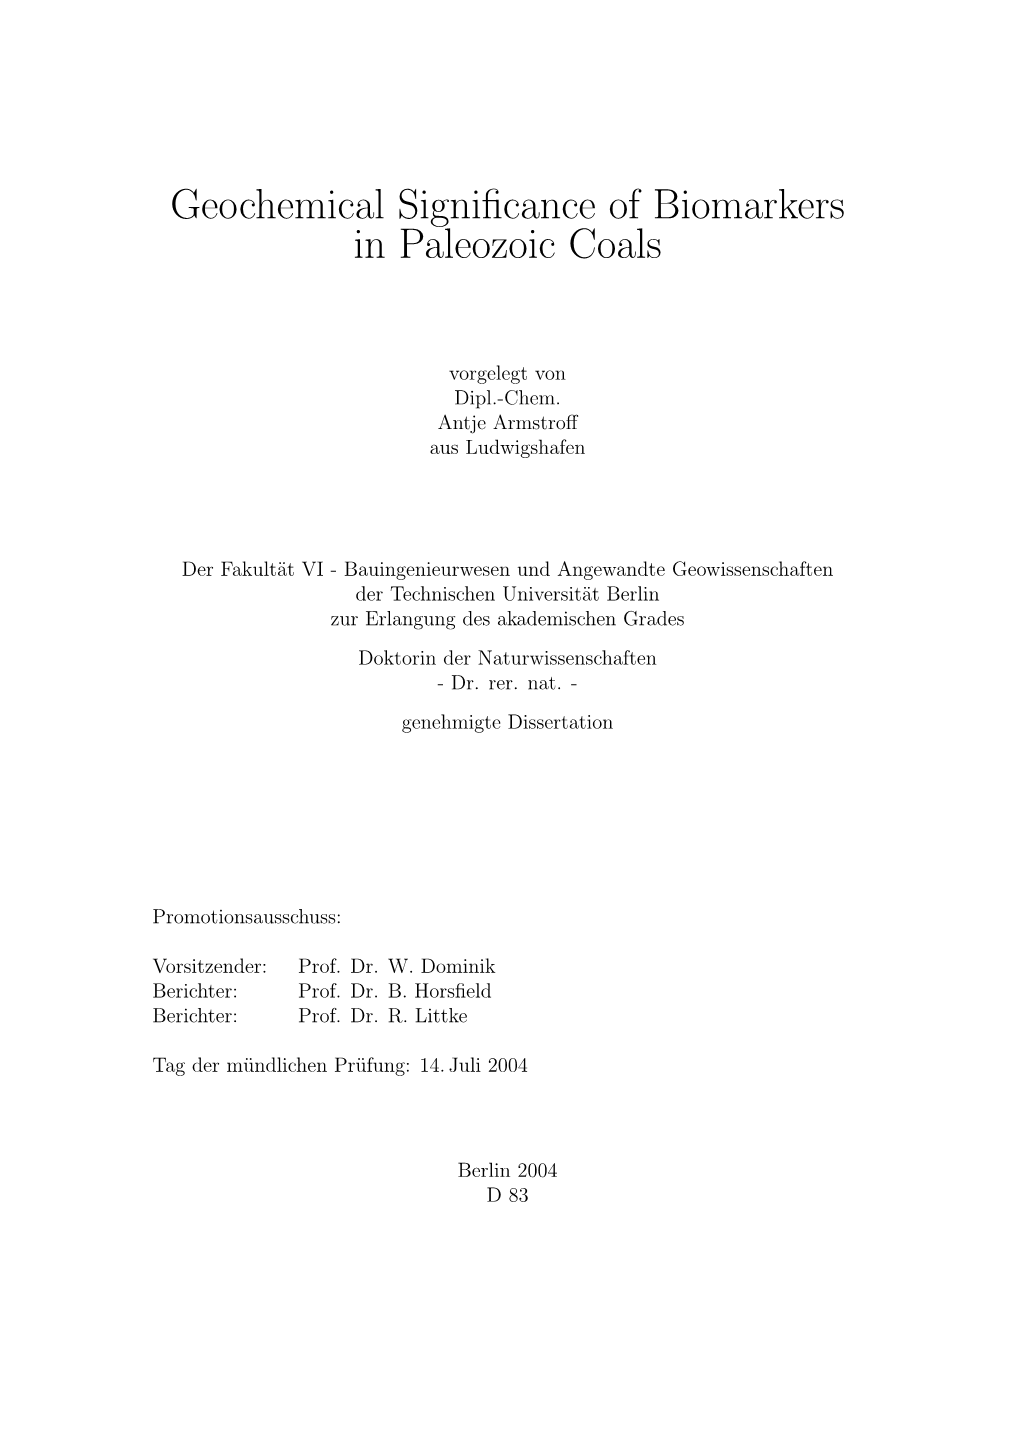 Geochemical Significance of Biomarkers in Paleozoic Coals